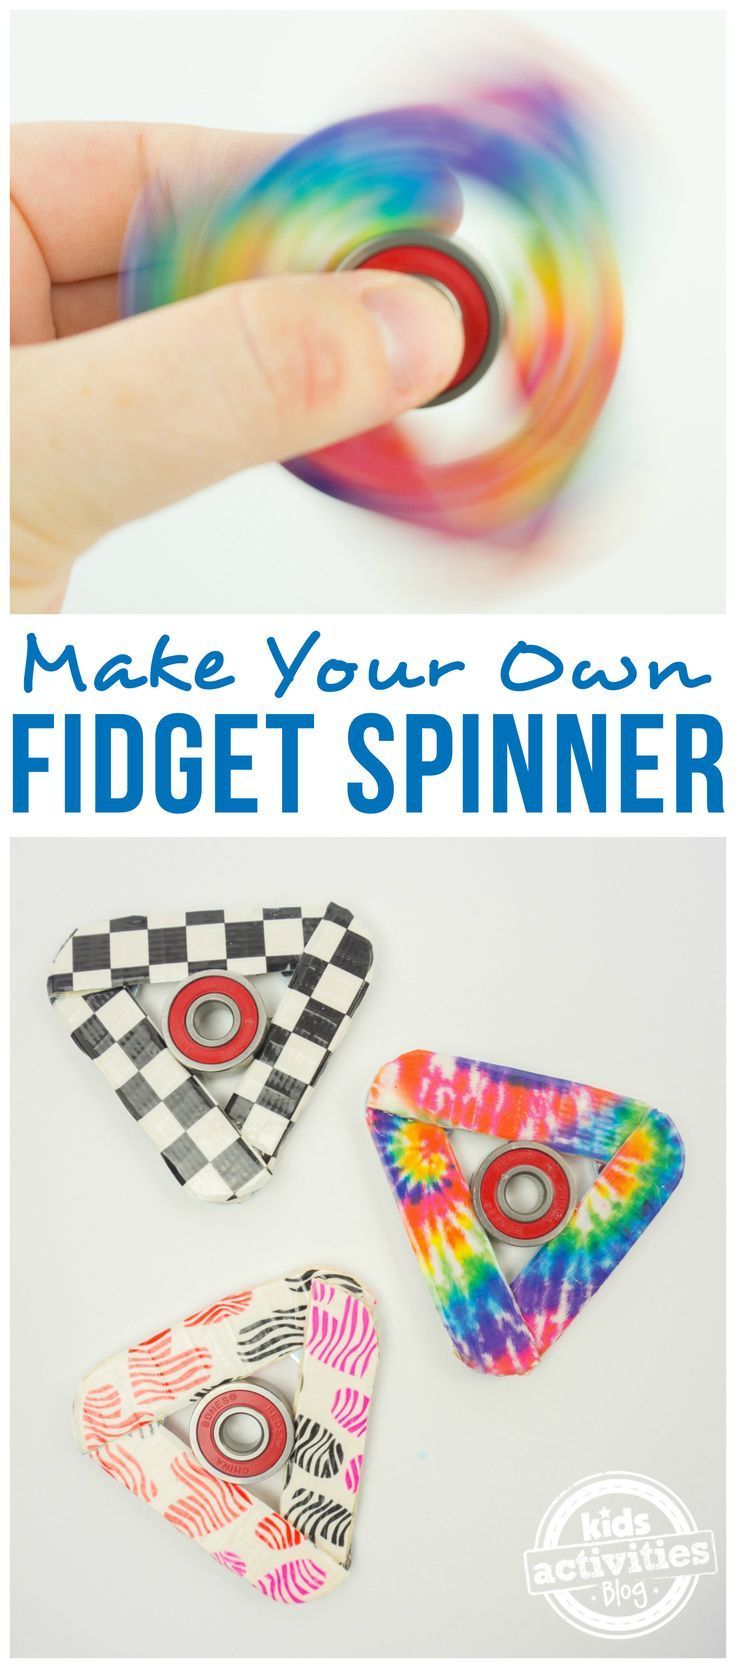 How to Make a Fidget Spinner from craft sticks! So easy and so much fun! This kid-friendly craft is perfect to make your own